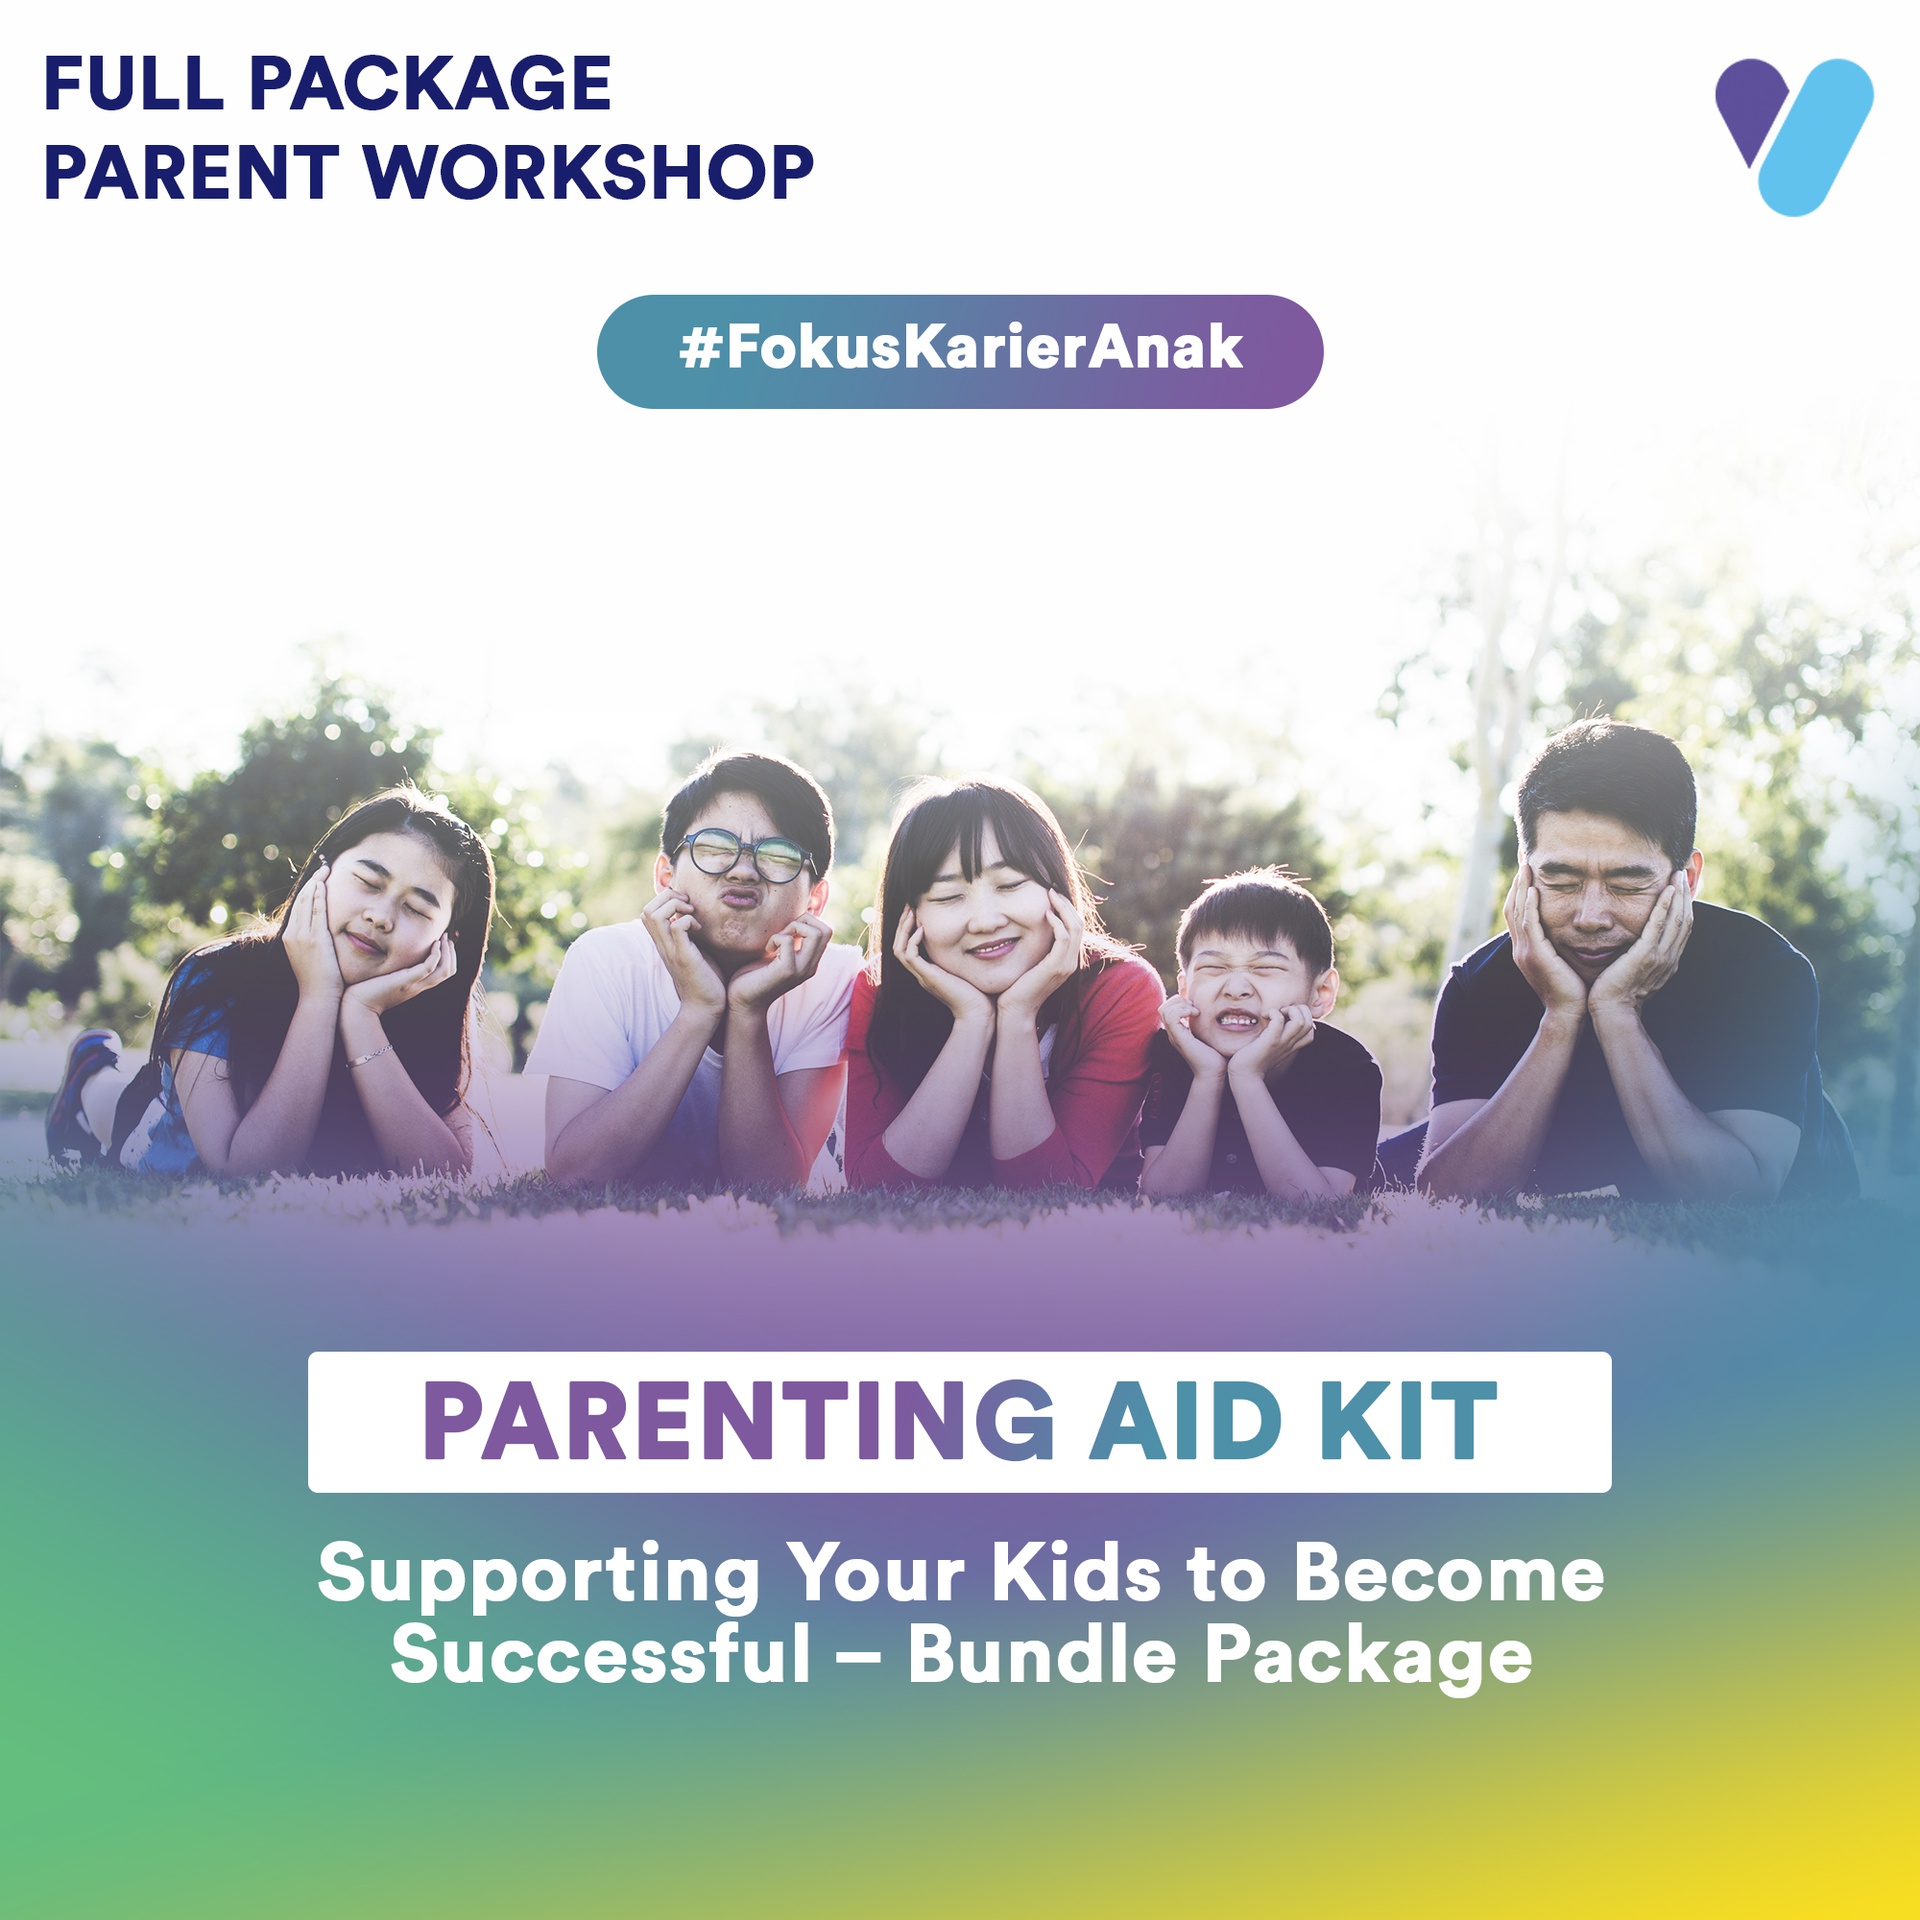 Parenting Aid Kit: Supporting Your Kids to Become Successful